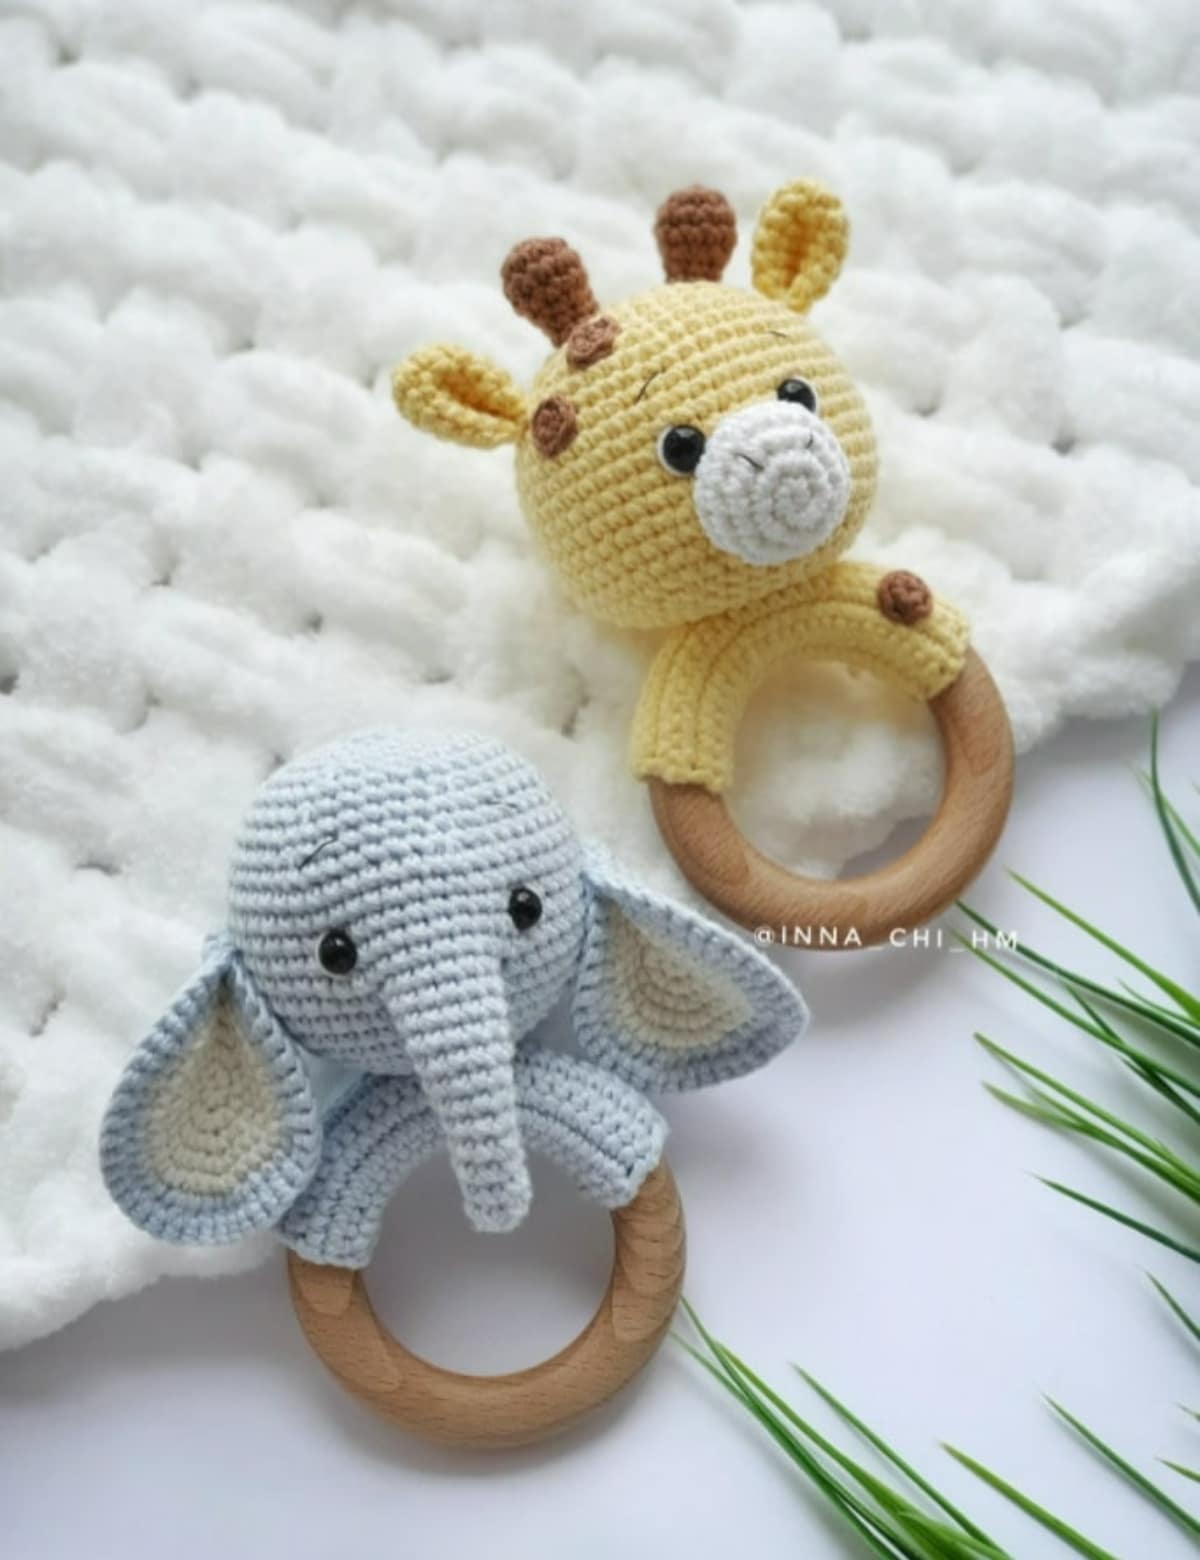  A small gray crochet elephant baby rattle next to a yellow and brown giraffe rattle lying on a white crochet blanket.